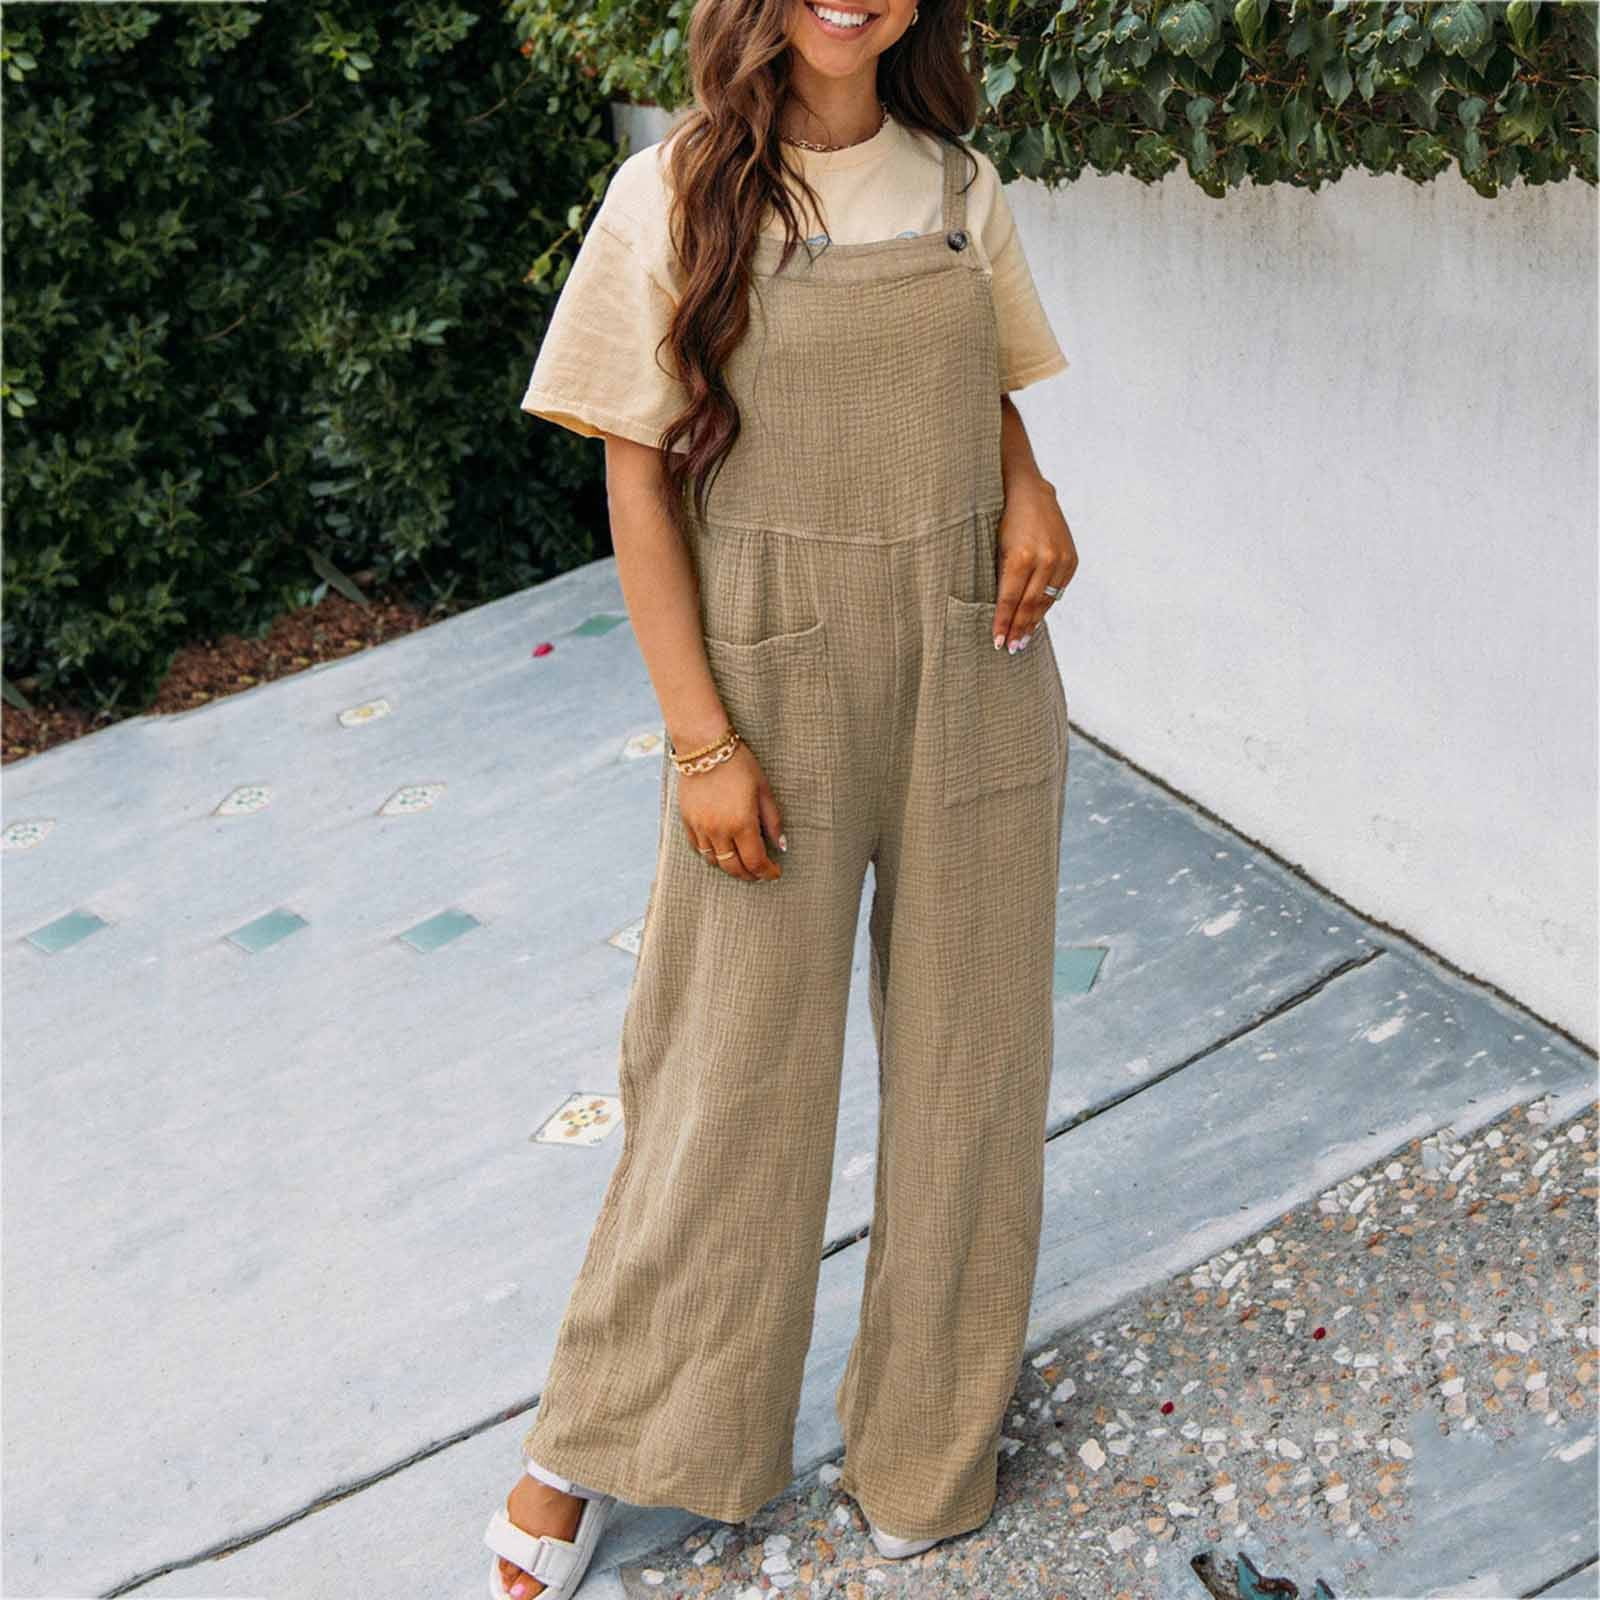 Aggregate more than 312 jumpsuit pants with suspenders latest